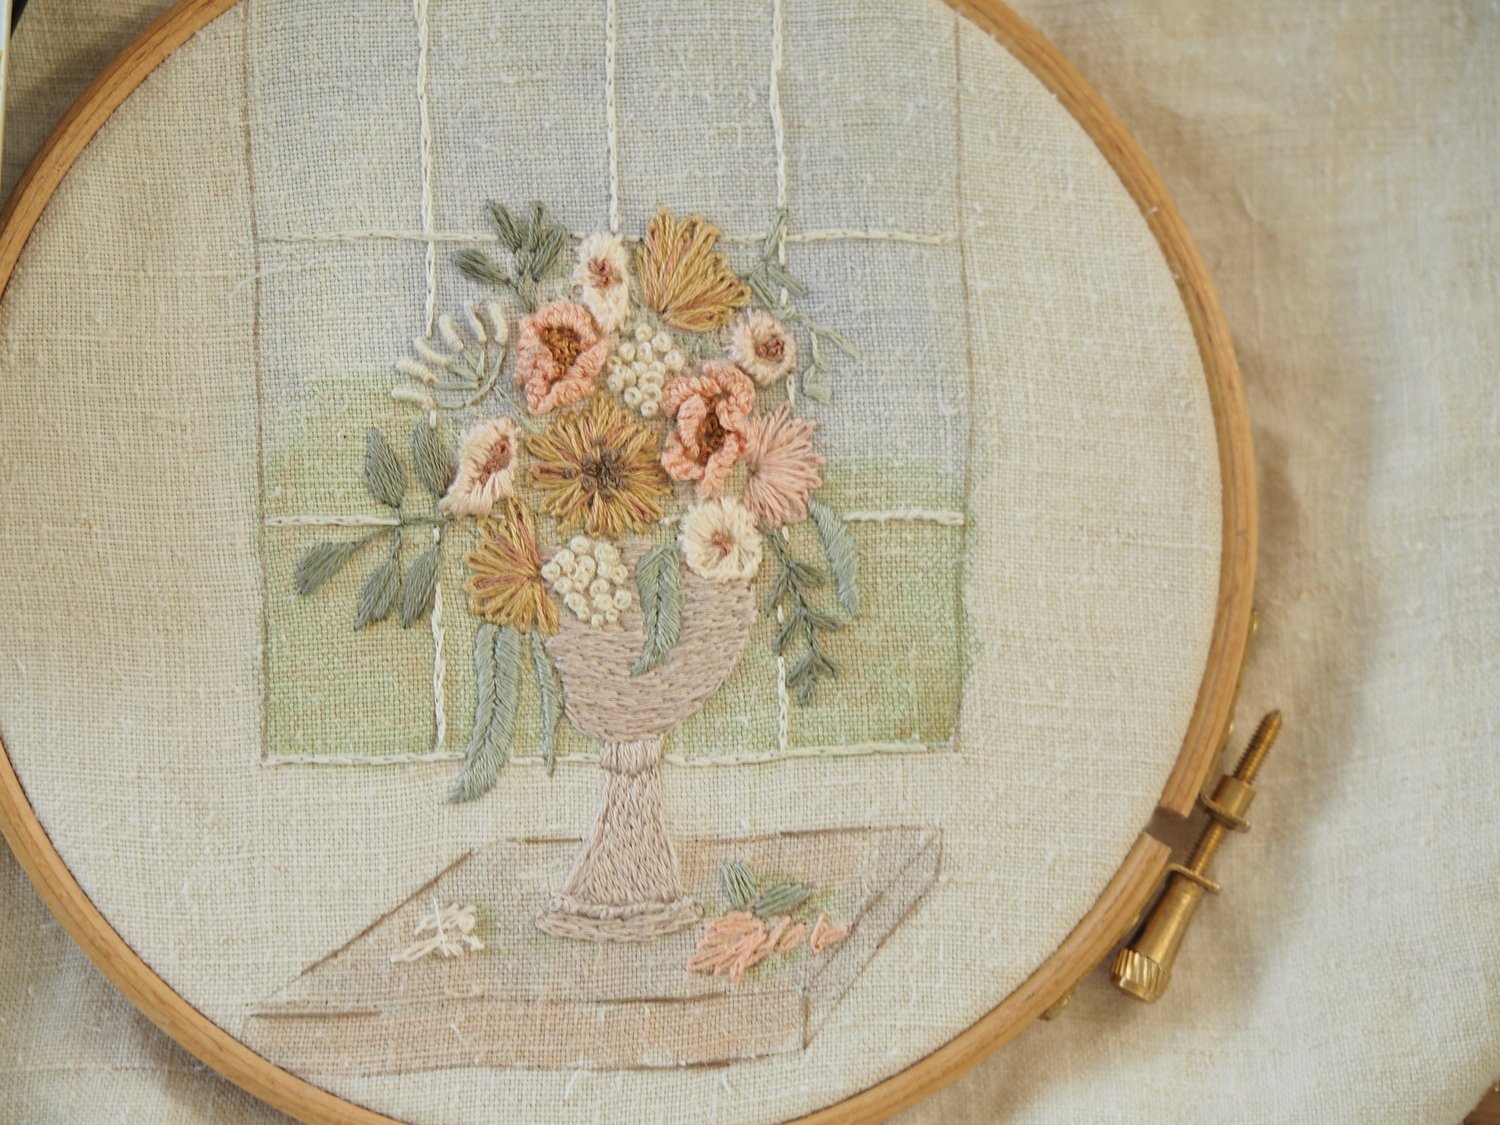 Assorted Mini Embroidery Kits by Nicki Franklin - Choose your favorite! —  Got Kwilts?